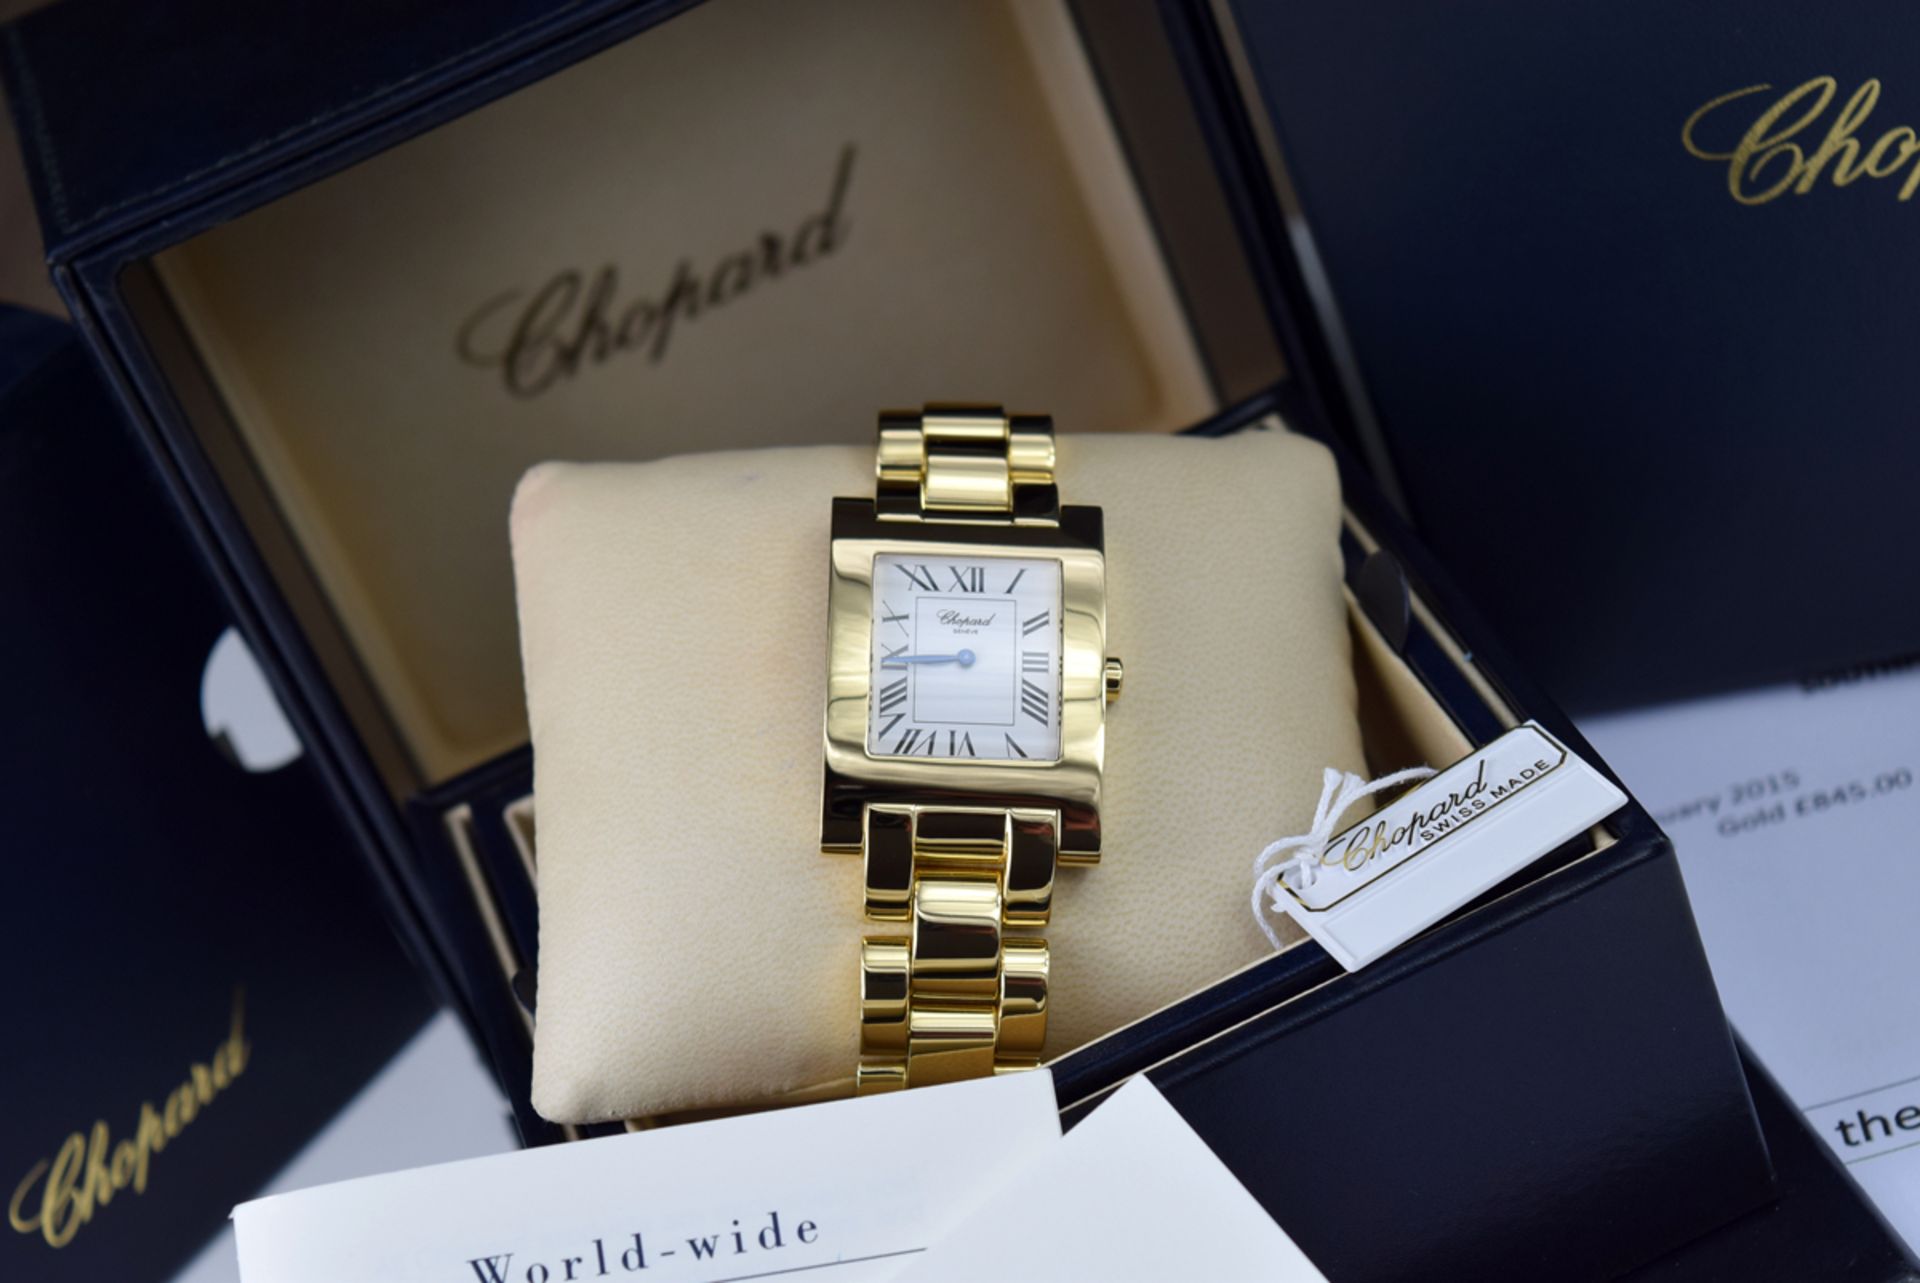 ❖ CHOPARD ❖ – CLASSIC 'HOUR' XL in 18k SOLID GOLD! XL SIZE (40mm x 30mm) BOX AND PAPERS! - Image 7 of 14